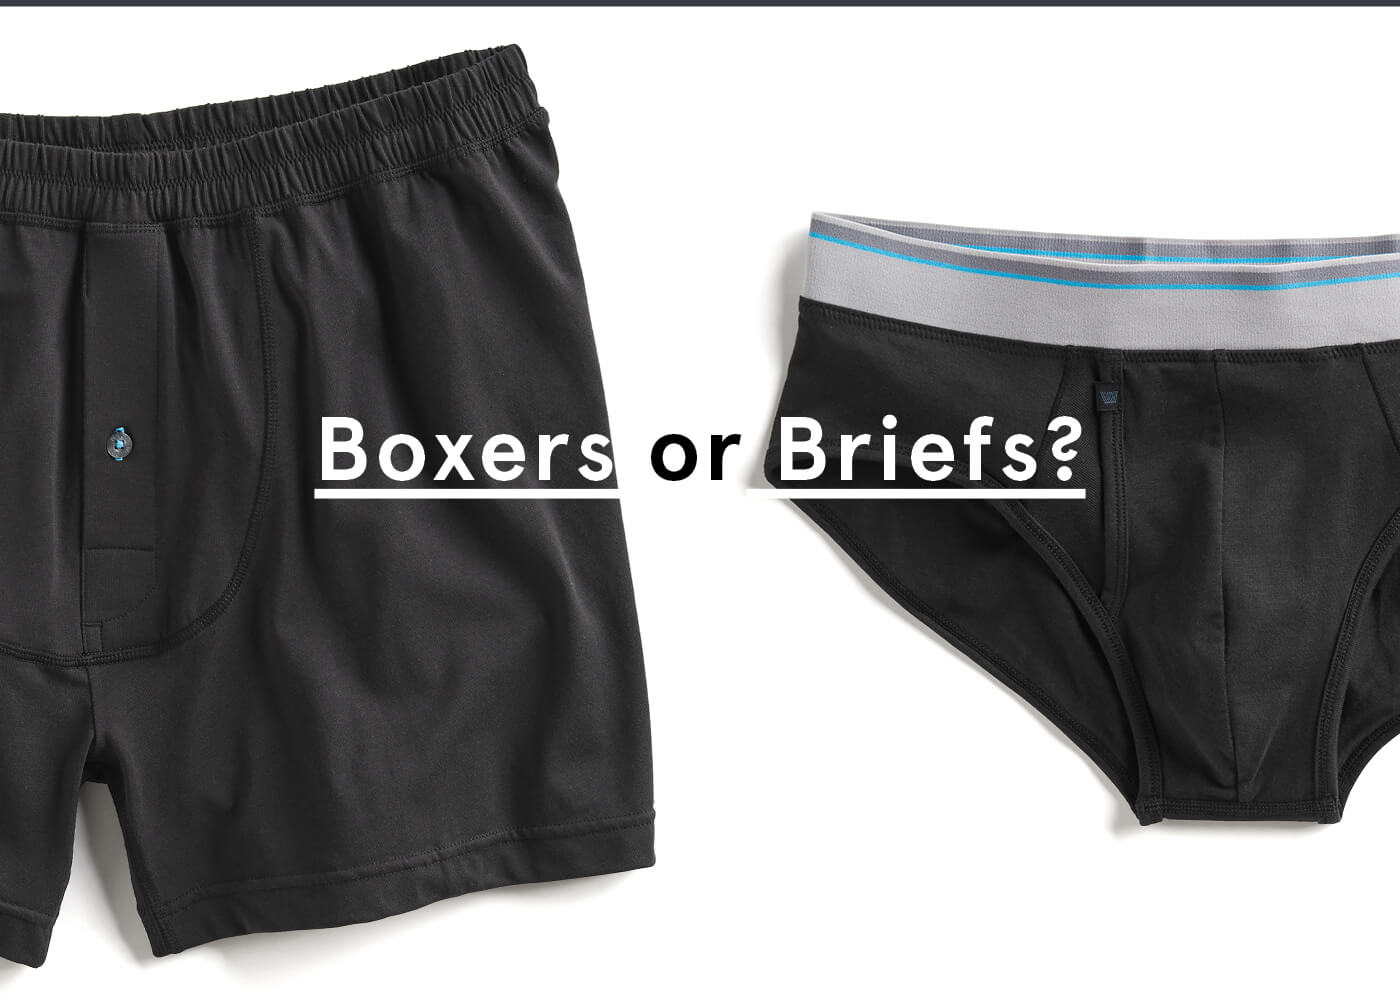 Boxers or briefs? How do I choose between the two?